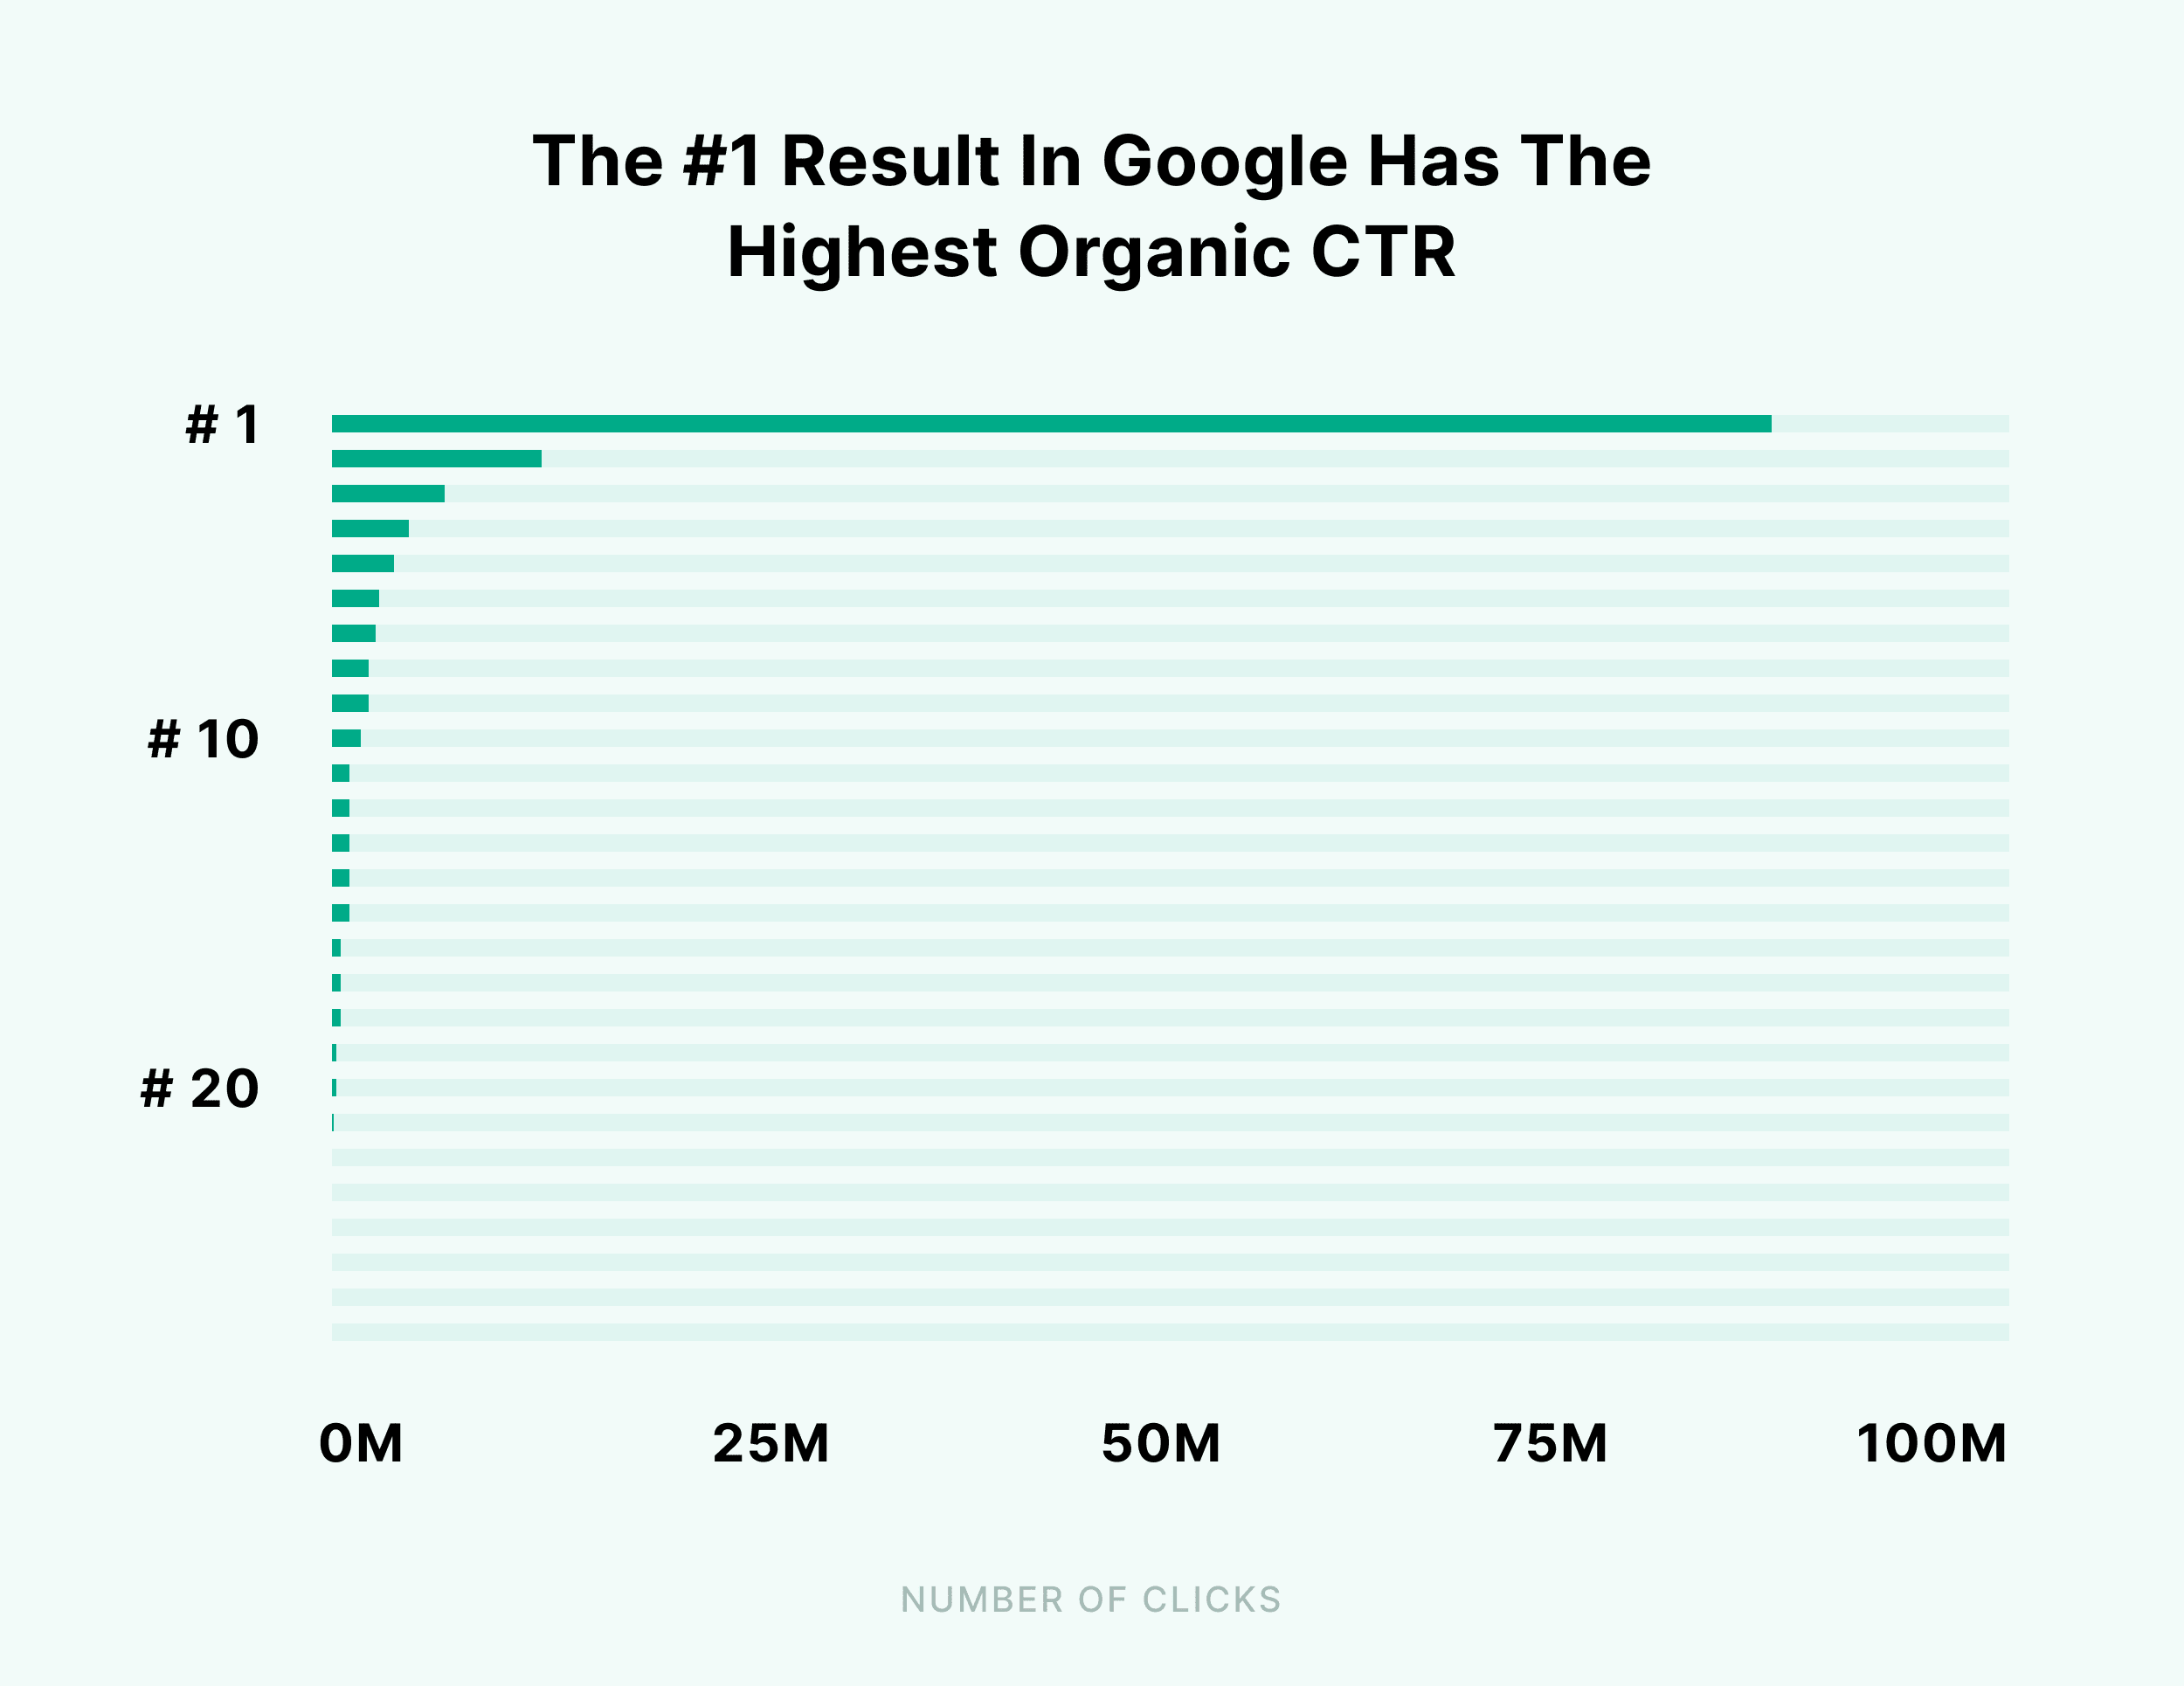 The number one result in Google has the highest organic CTR